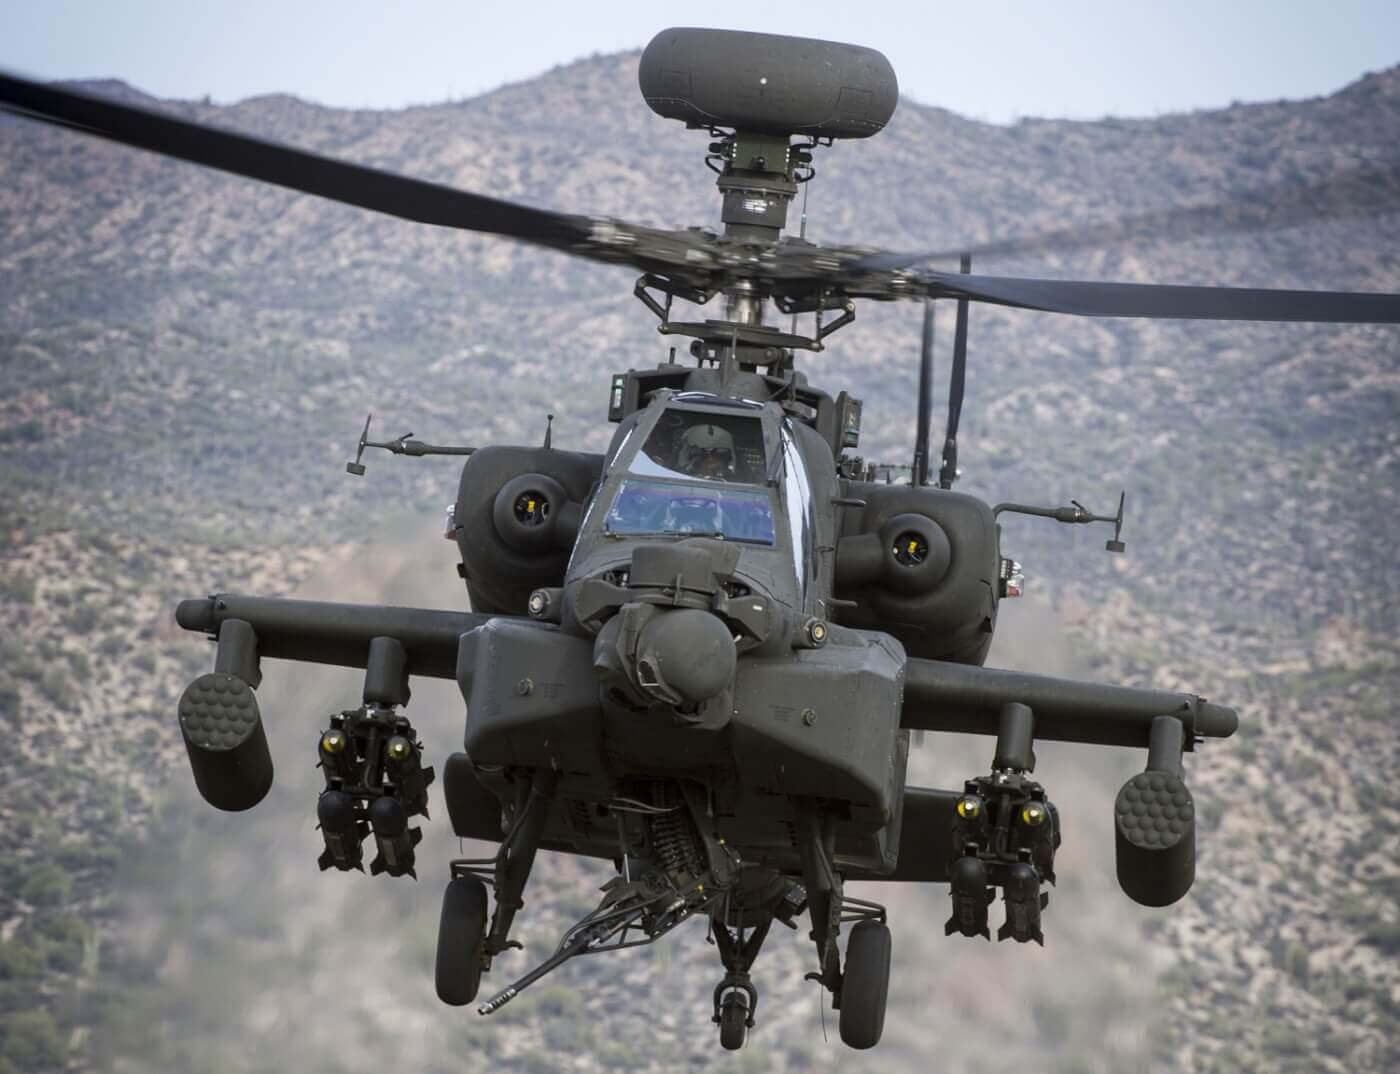 AH-64E Apache helicopter in flight